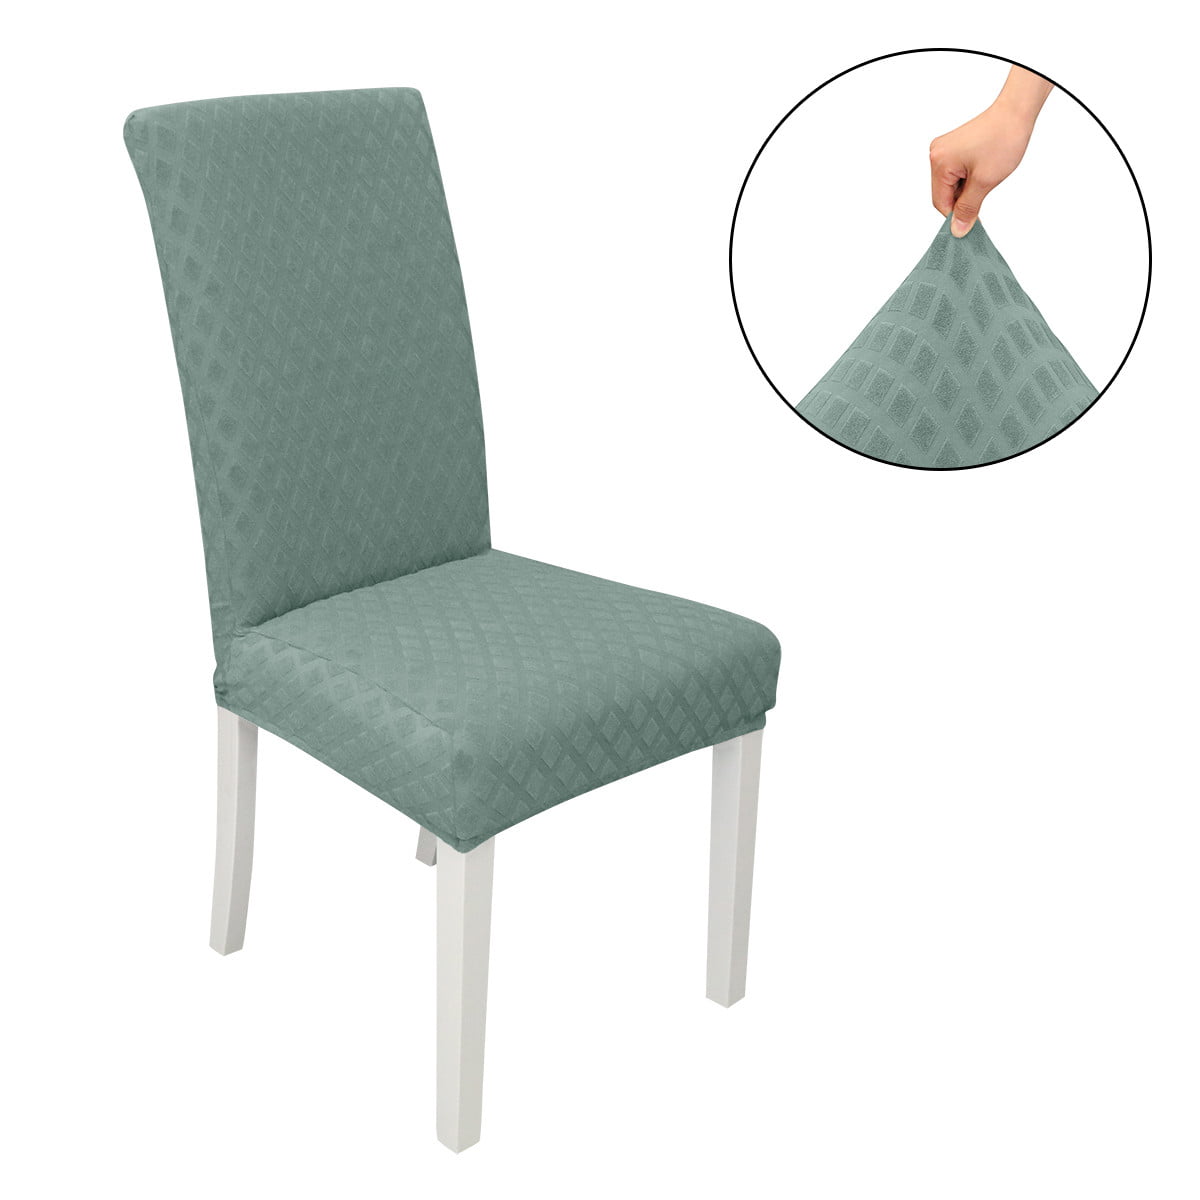 Stretch Super Fit Short Dining Room Chair Cover Dinner Table Slipcover Protector 